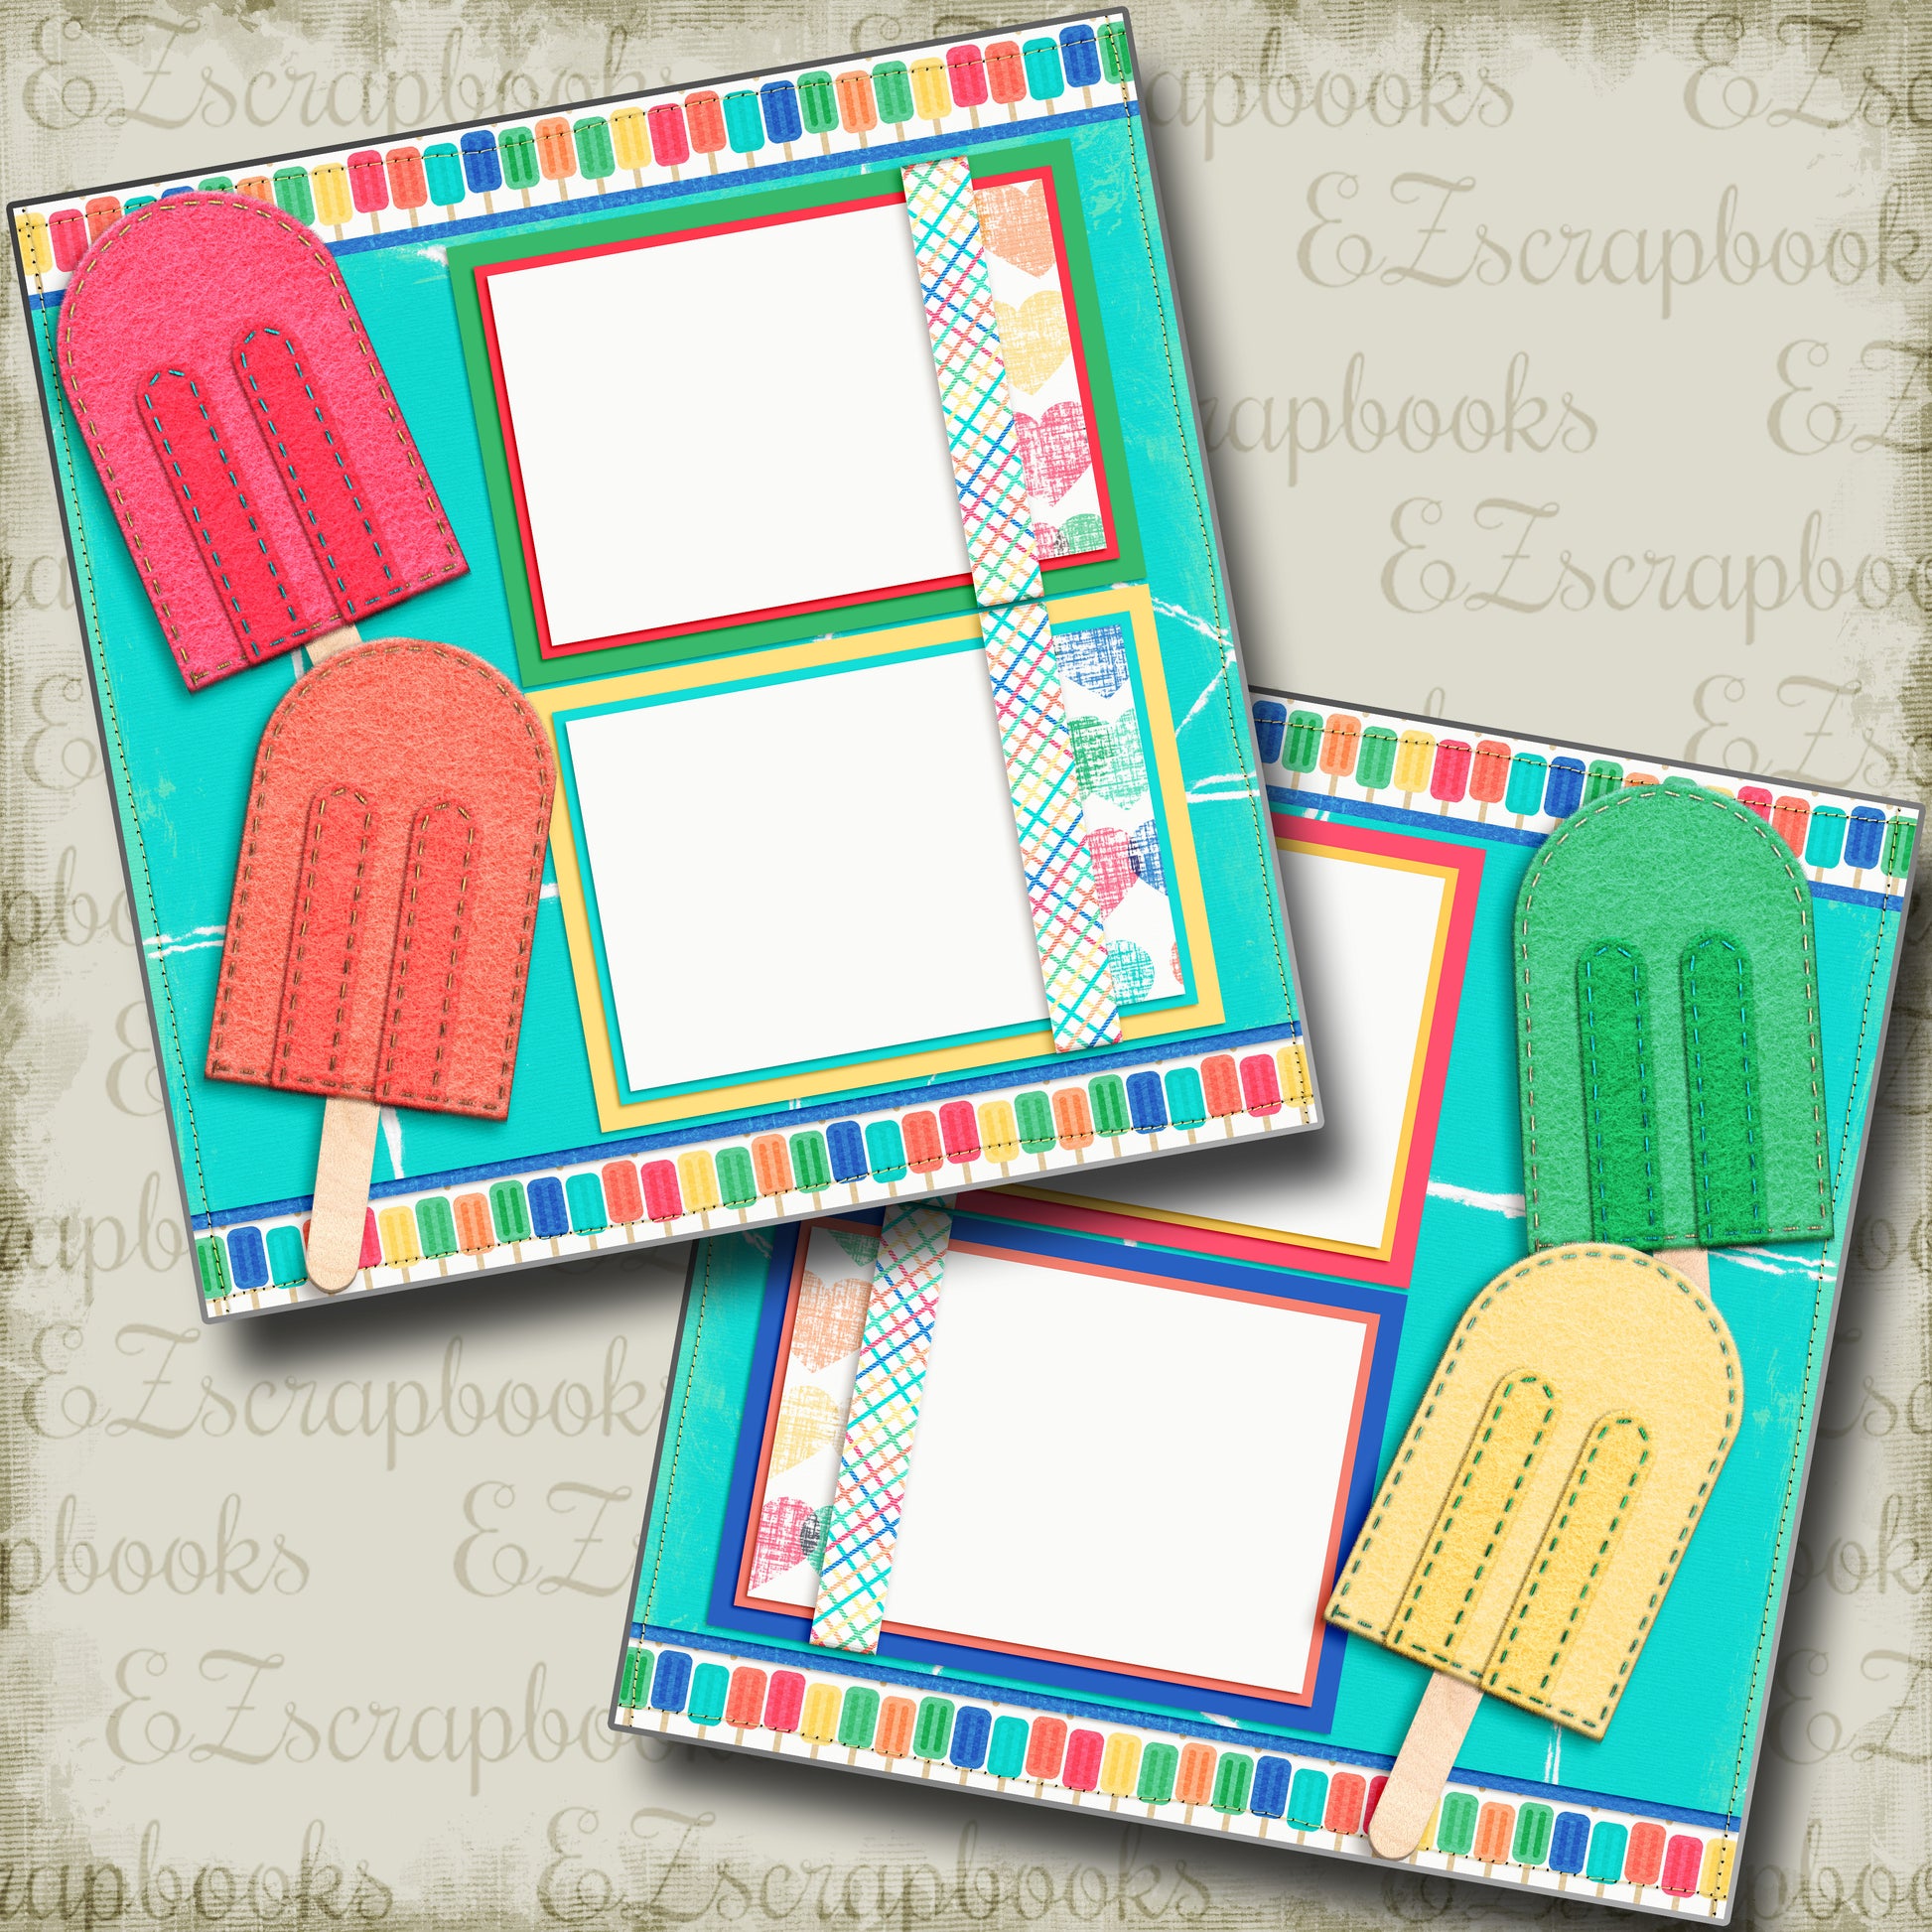 Chill Out - 4060 - EZscrapbooks Scrapbook Layouts Beach - Tropical, Summer, Swimming - Pool